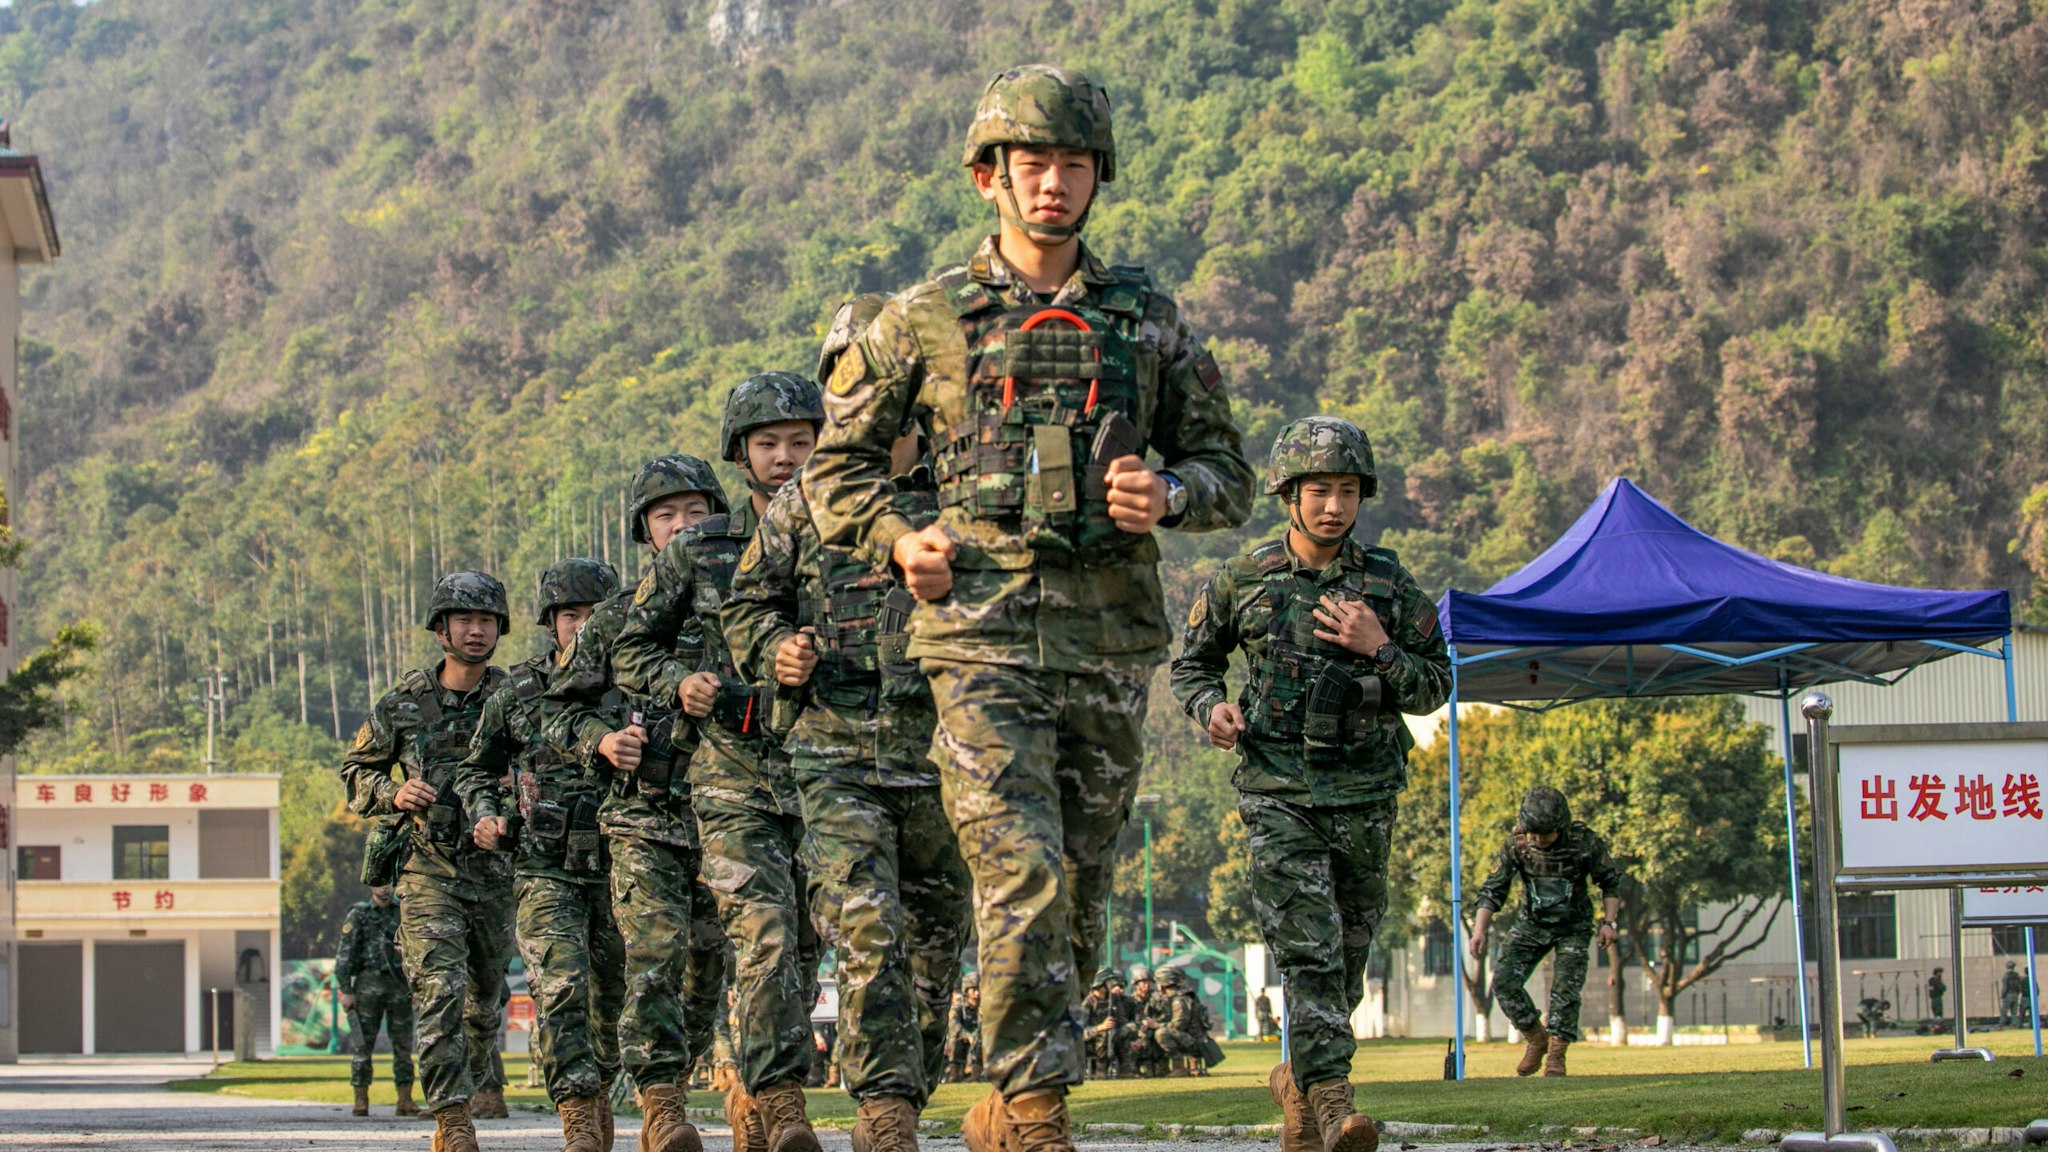 HECHI, CHINA - MARCH 22, 2023 - Security personnel make their way to a target trench in Hechi city, Guangxi Province, China, March 22, 2023.